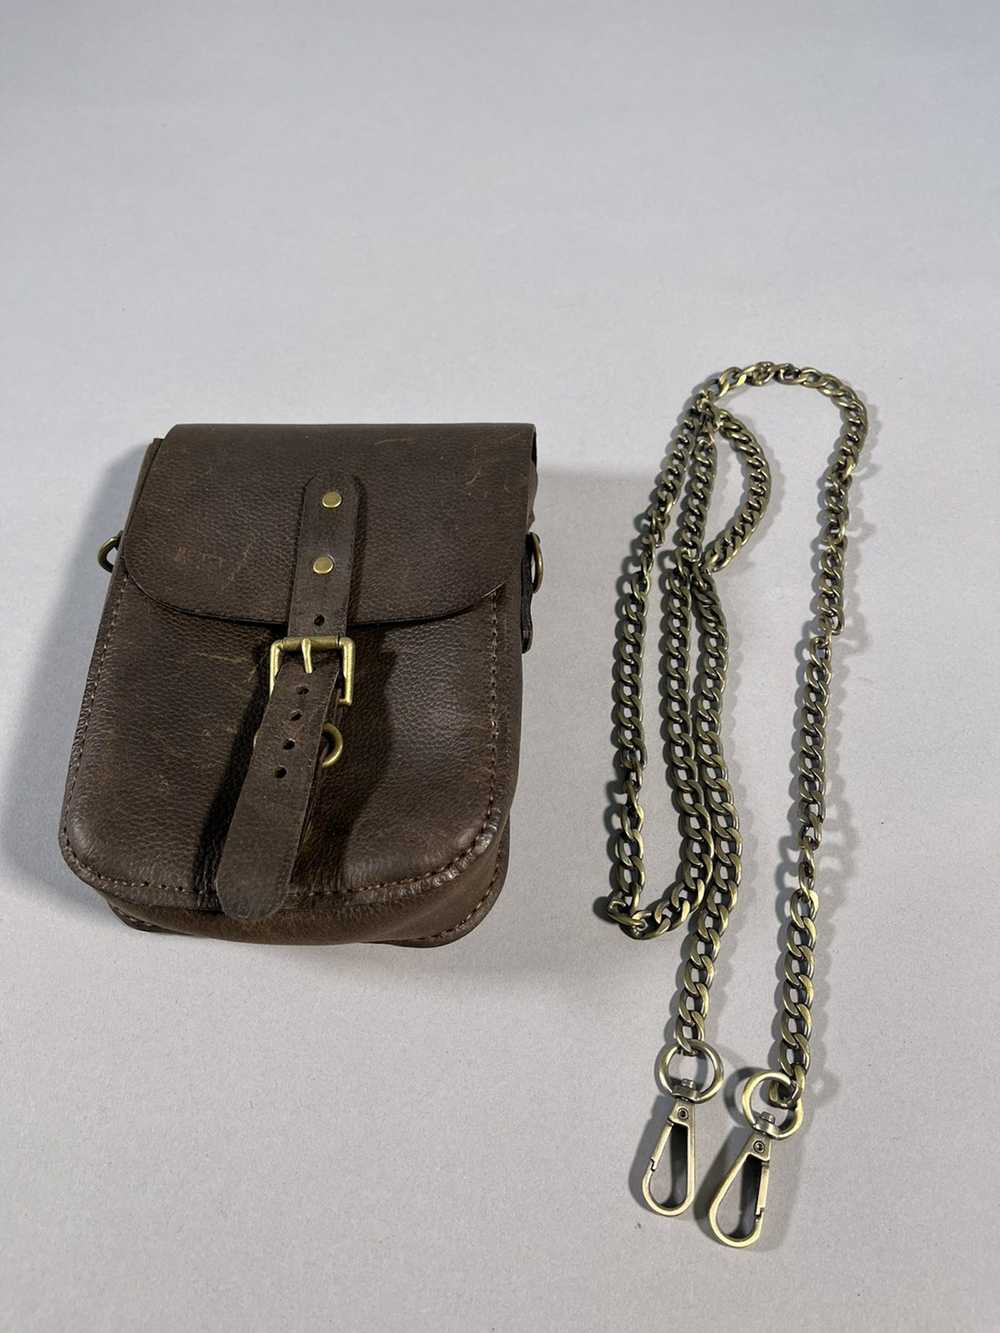 Leather × Vintage Vintage Leather Bag with Chain - image 7